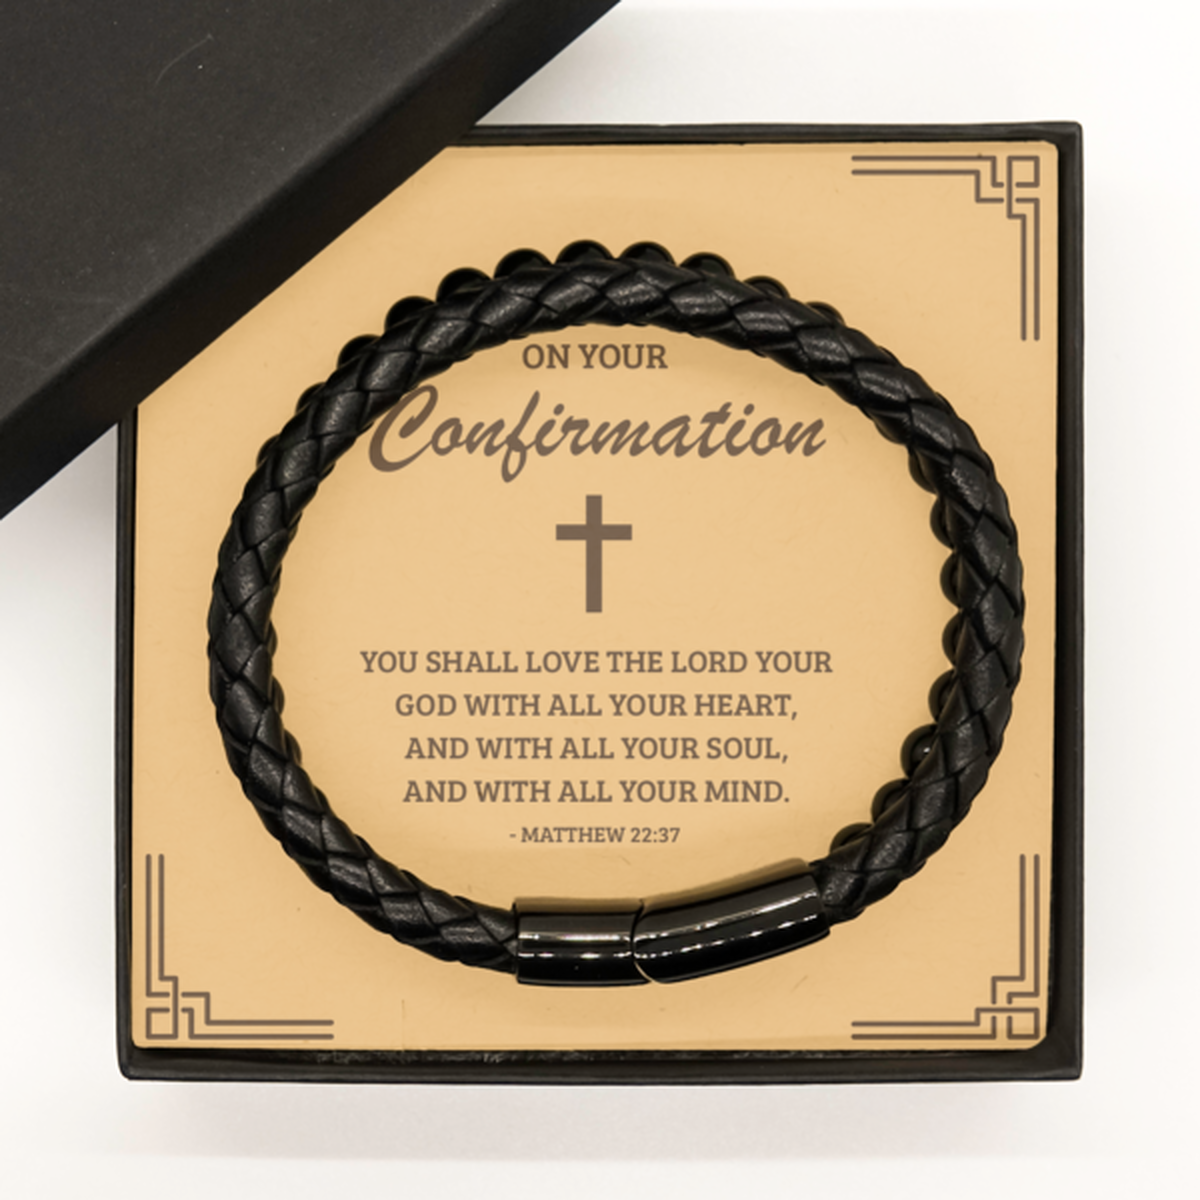 Confirmation Gifts for Teenage Boys, You shall love the Lord your God, Stone Leather Bracelet with Bible Verse Message Card, Religious Catholic Bracelet for Son, Grandson, Dad, Godfather